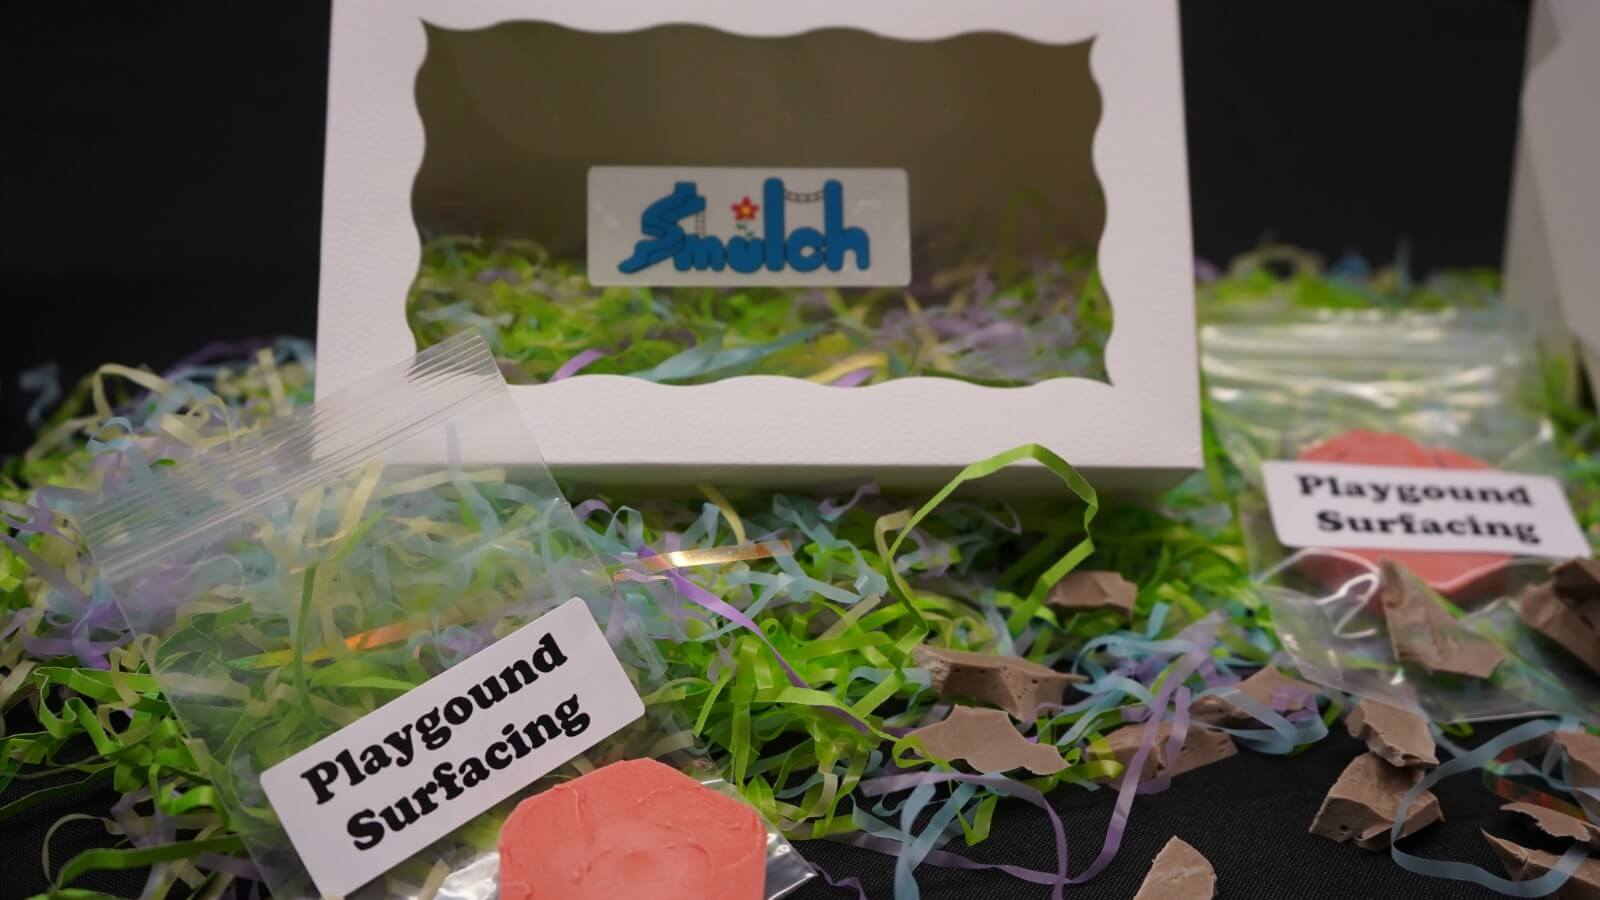 The Student Soybean Innovation Competition grand prize product "Smulch" is displayed alongside fellow entrees for the 2022 event.